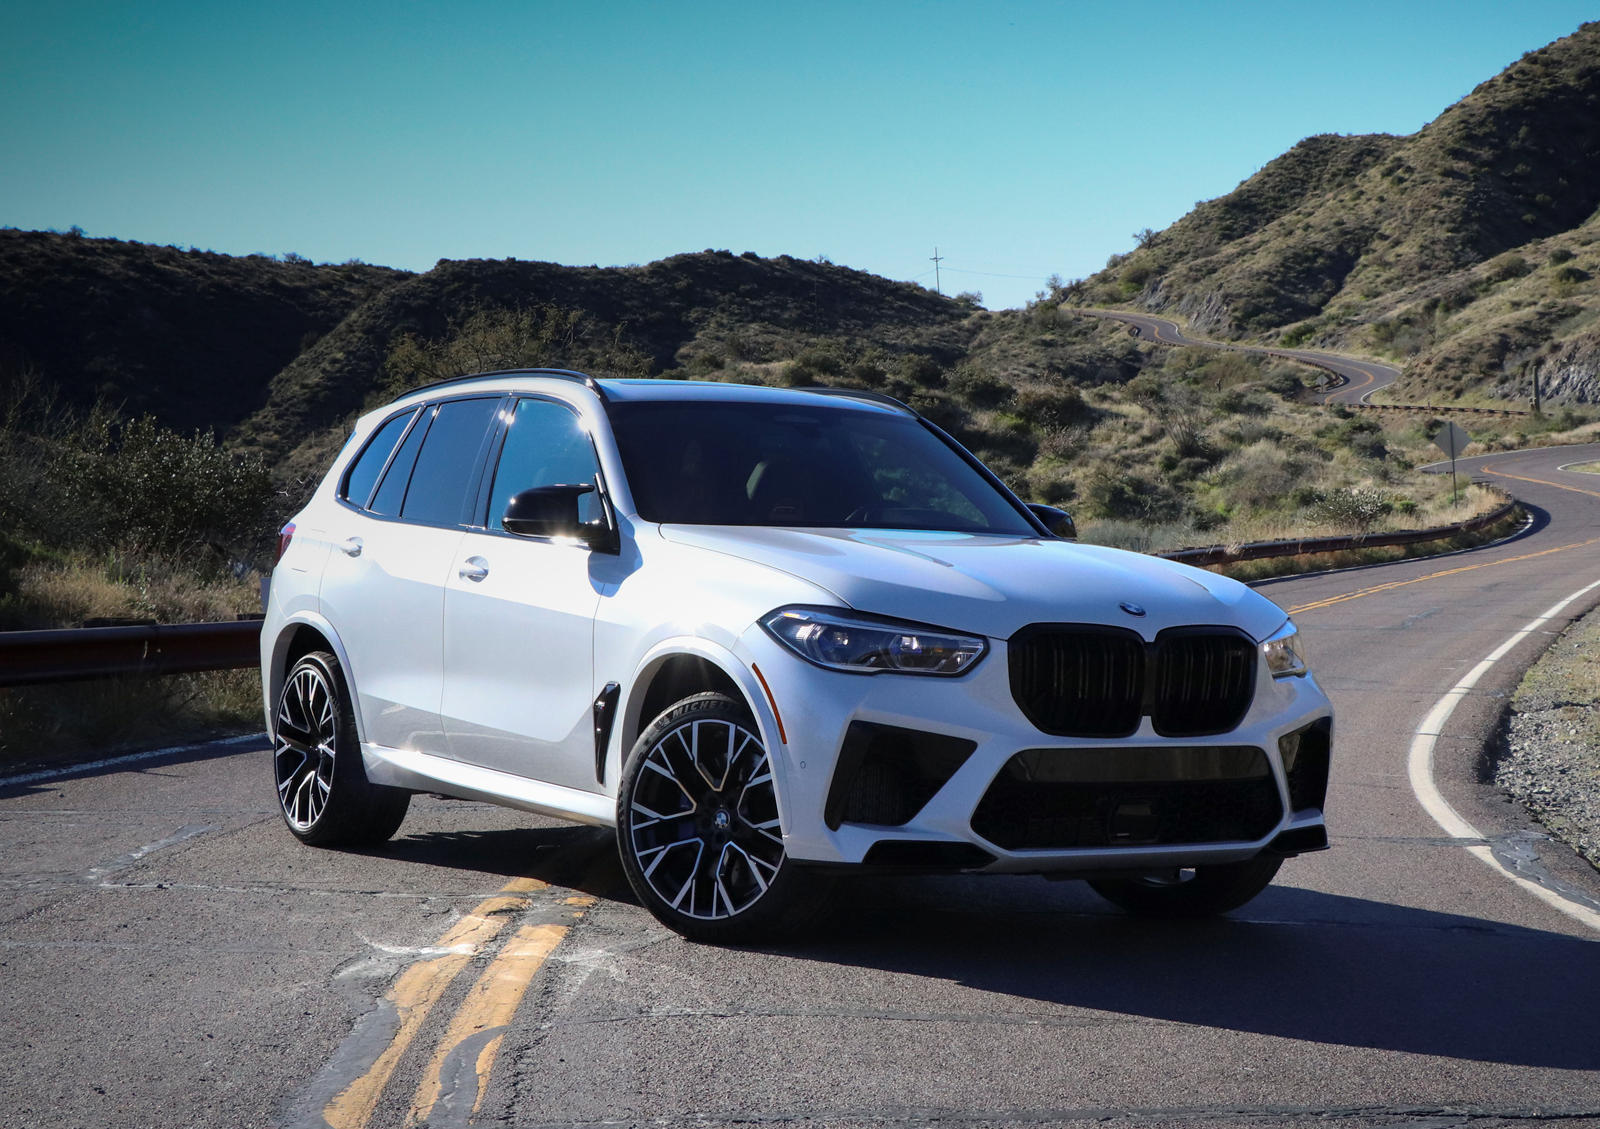 2020 BMW X5 M First Drive Review: Stupefyingly Fast, Surprisingly Civil |  CarBuzz